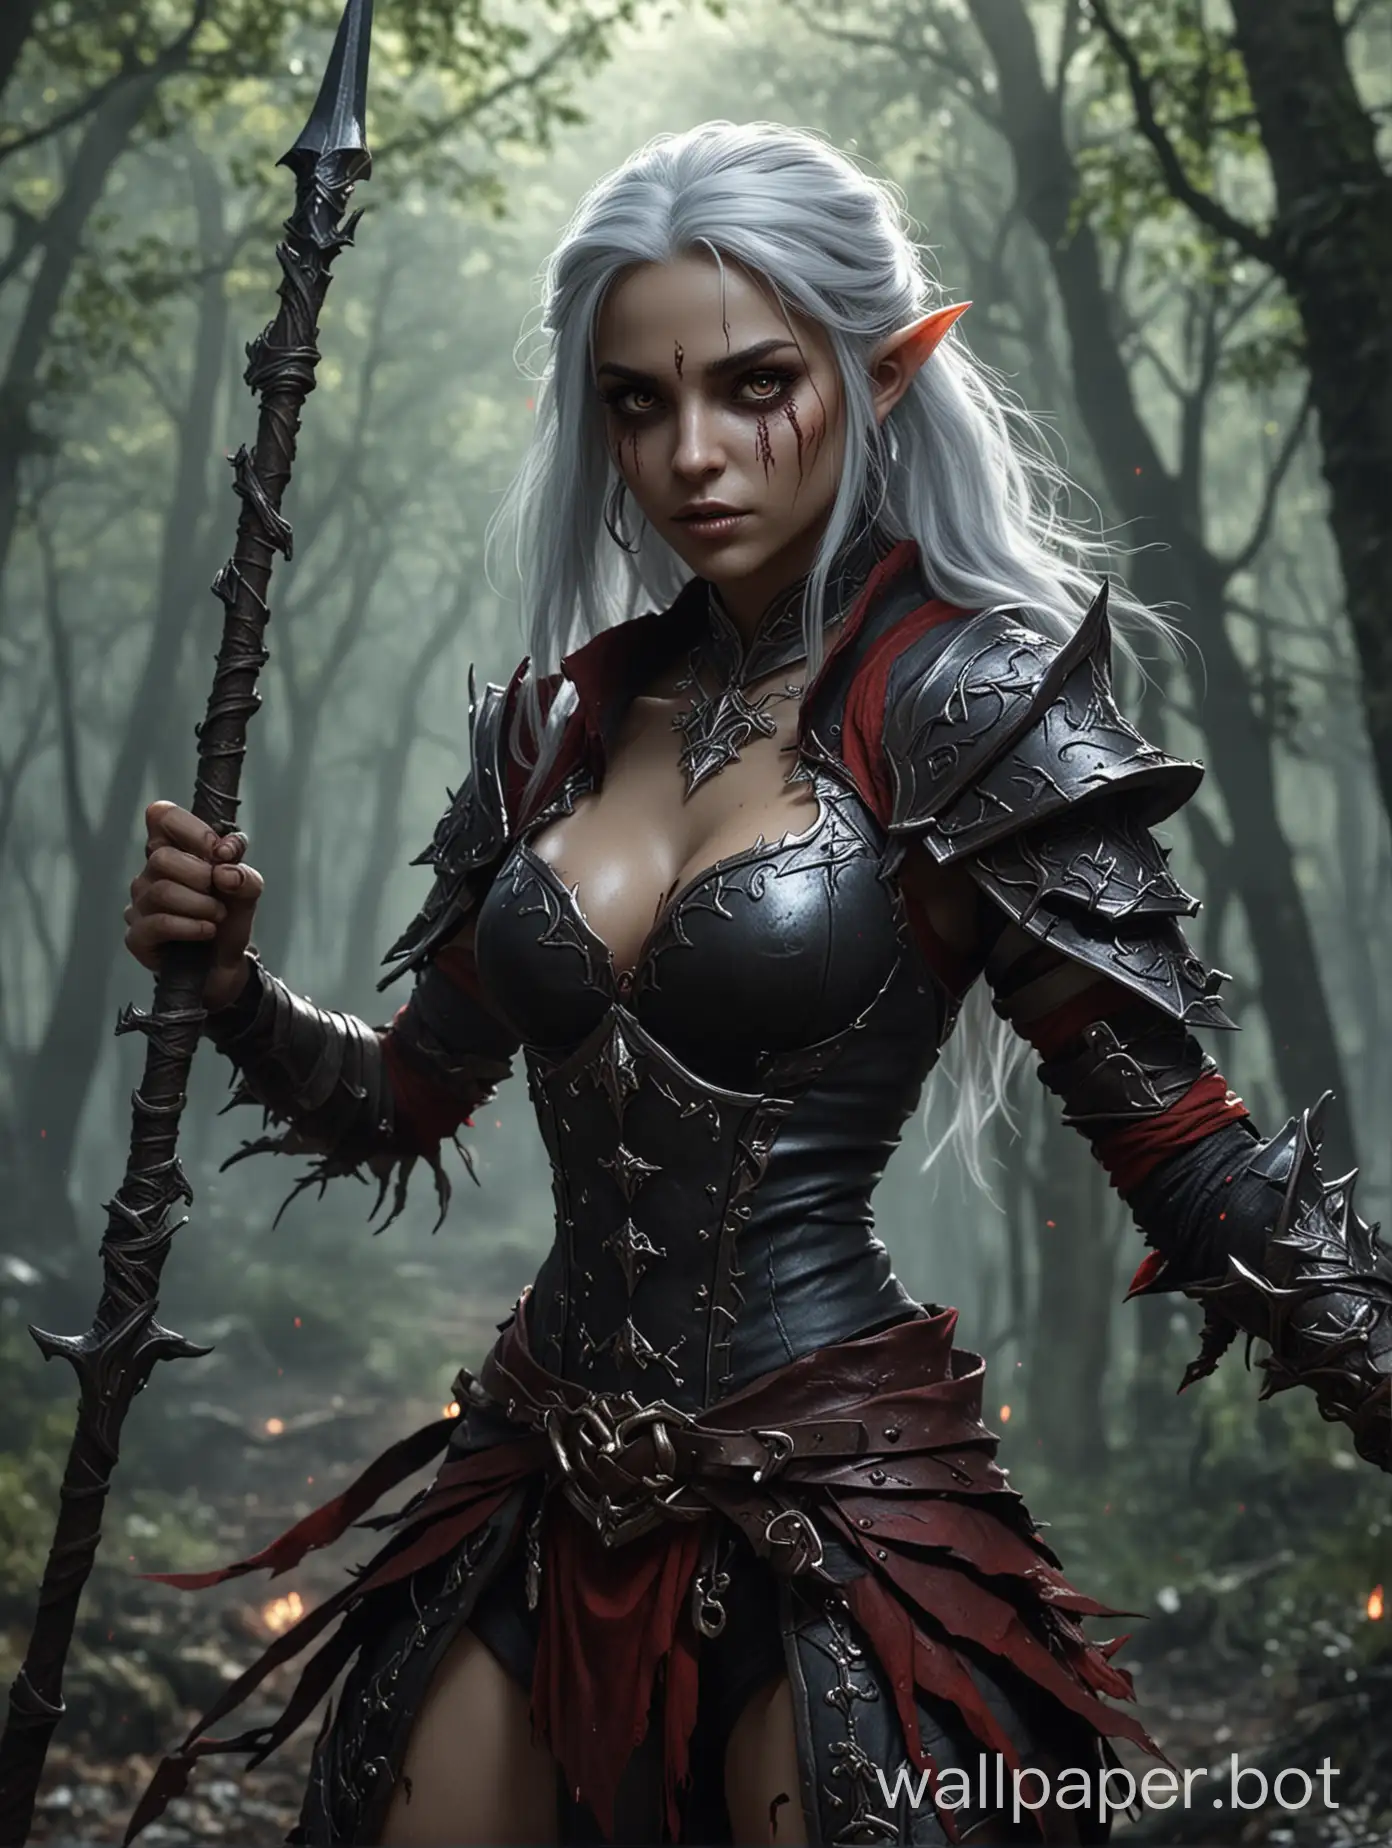 Epic-Battle-Shadowheart-Dark-Elf-Warrior-Confronts-Goblins-and-Sorcerers-in-the-Enchanted-Forest